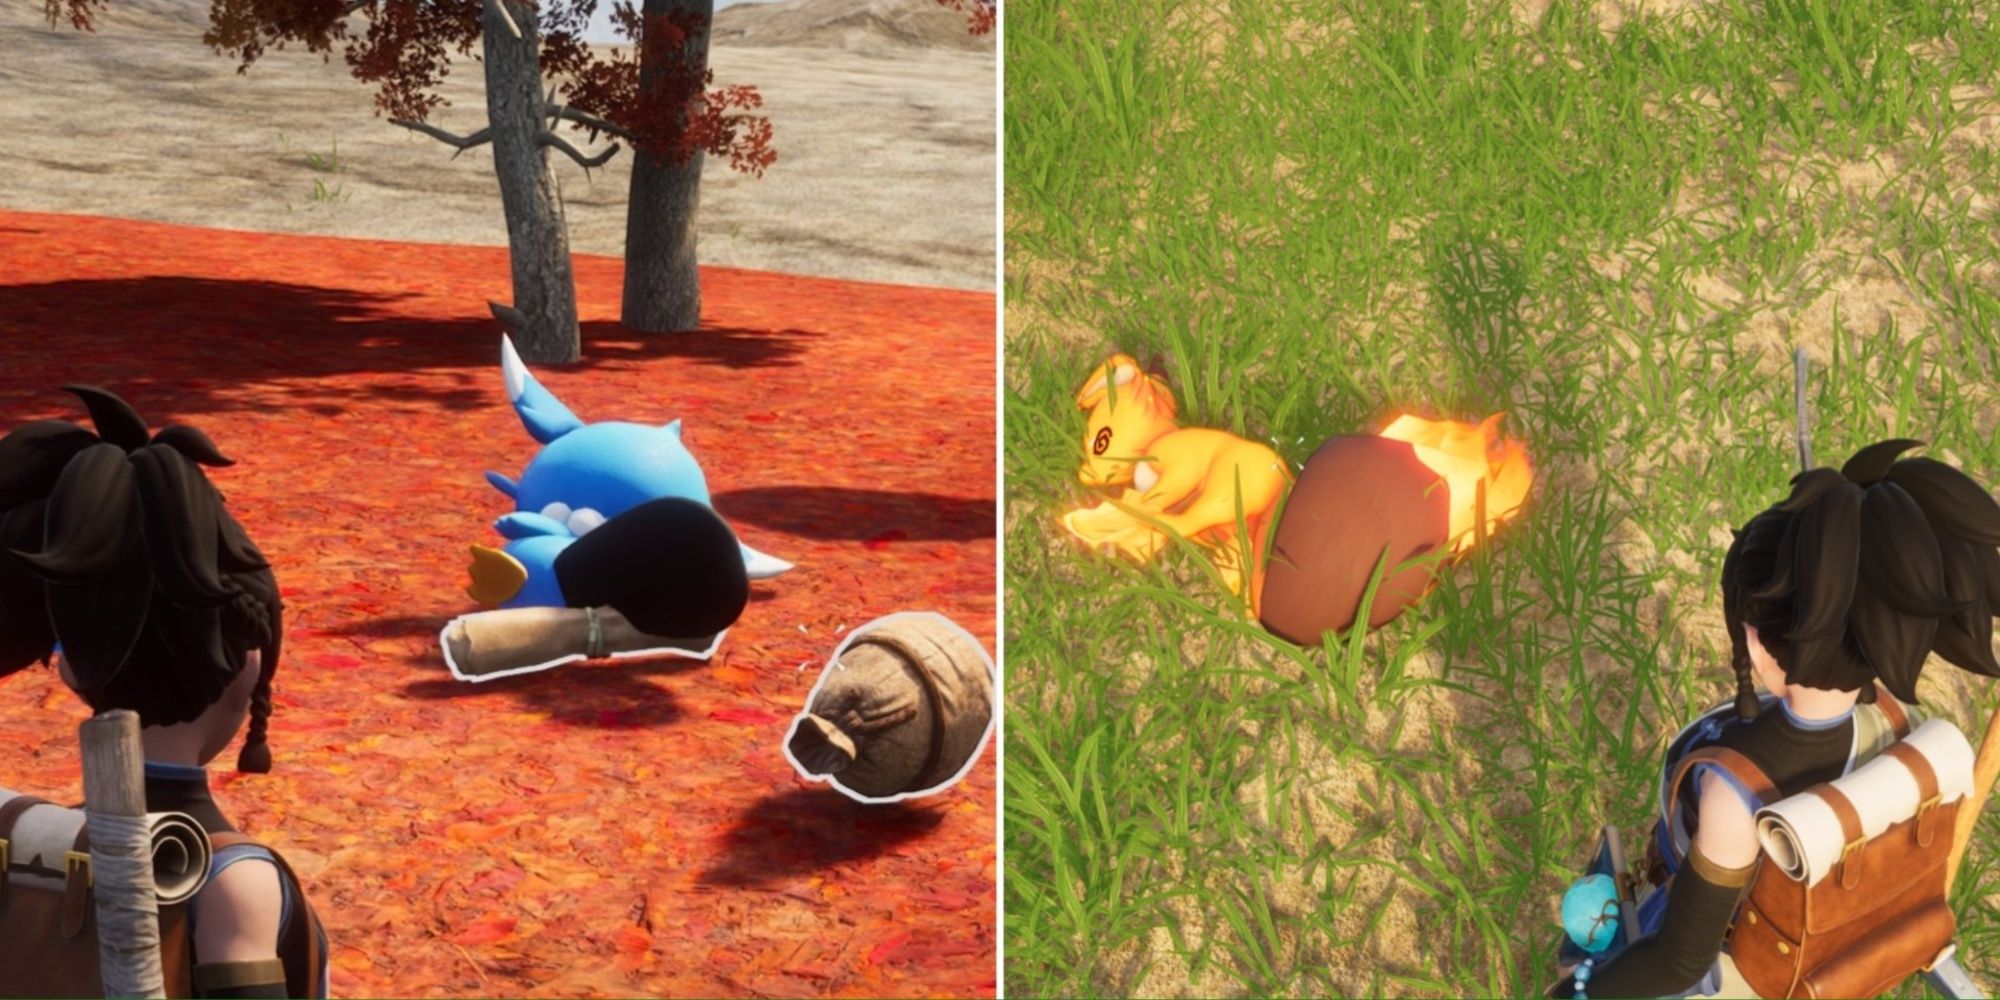 Palworld: A split image with the player character looking at a dead Fuack on the left and a dead Foxparks on the right